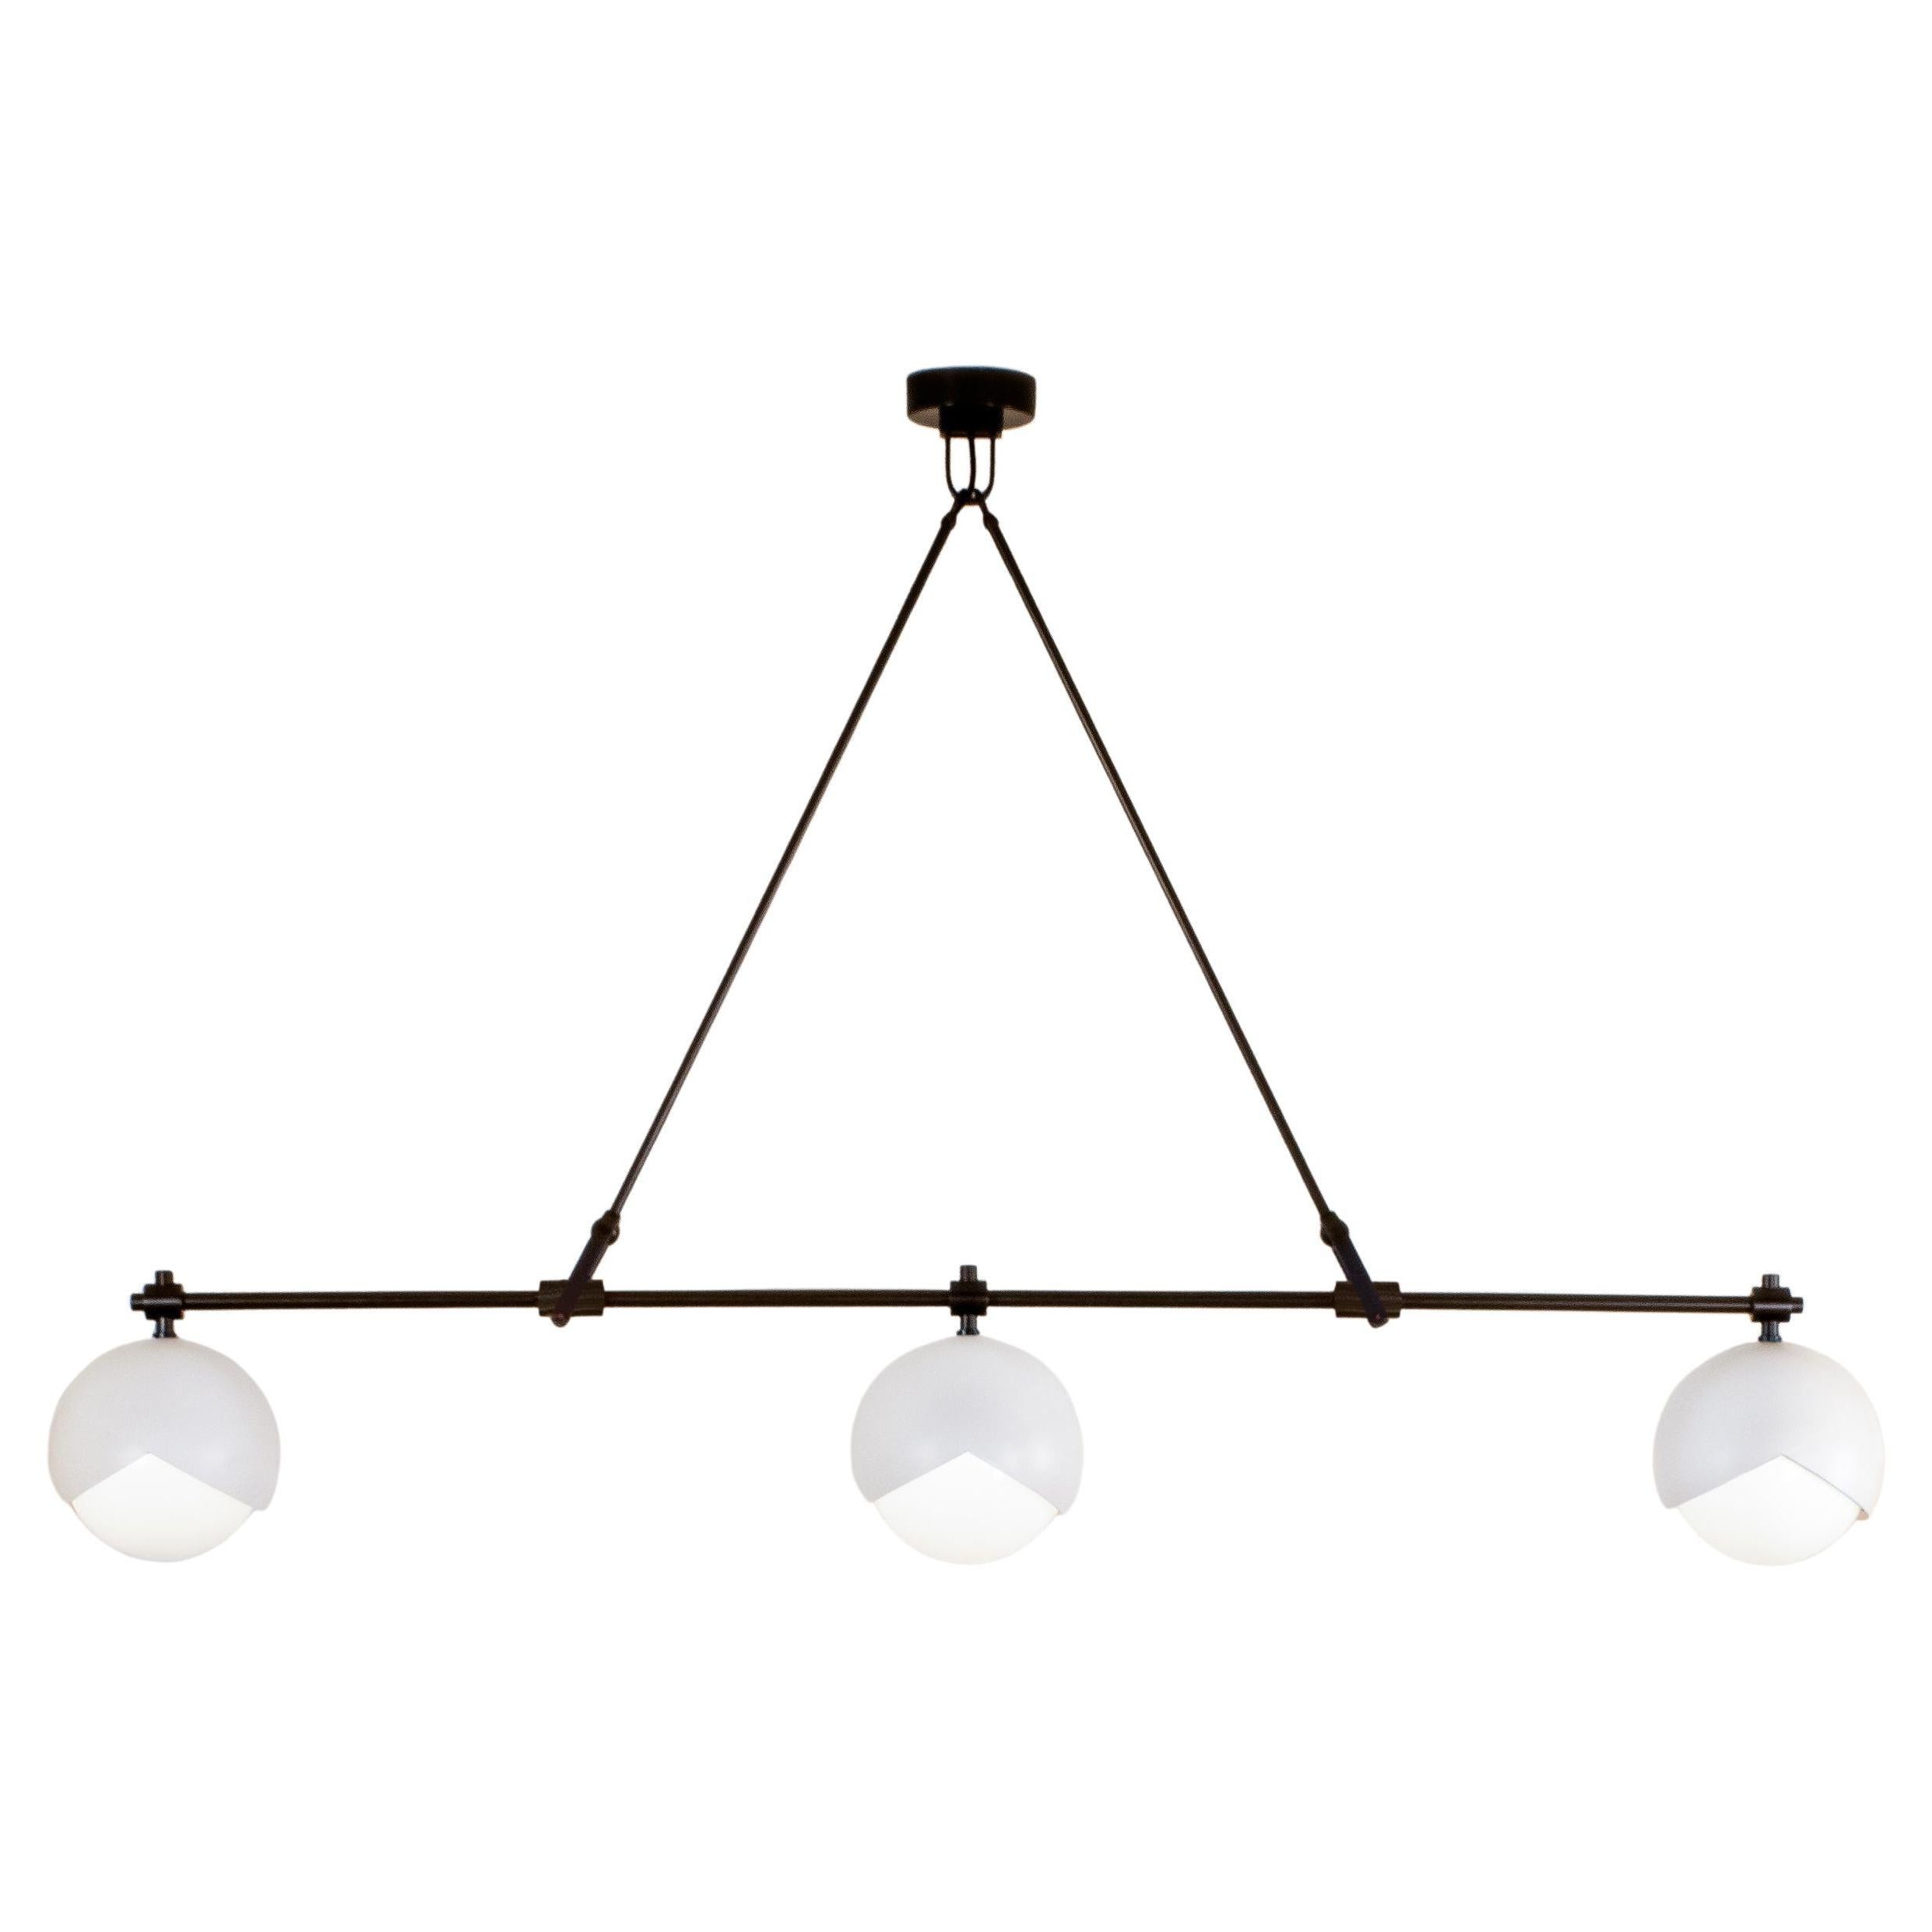 2019 Benedict Linear Chandelier In Matte White Powder Coat And Blackened Brass  For Sale At 1stdibs With White Powder Coat Chandeliers (View 9 of 15)